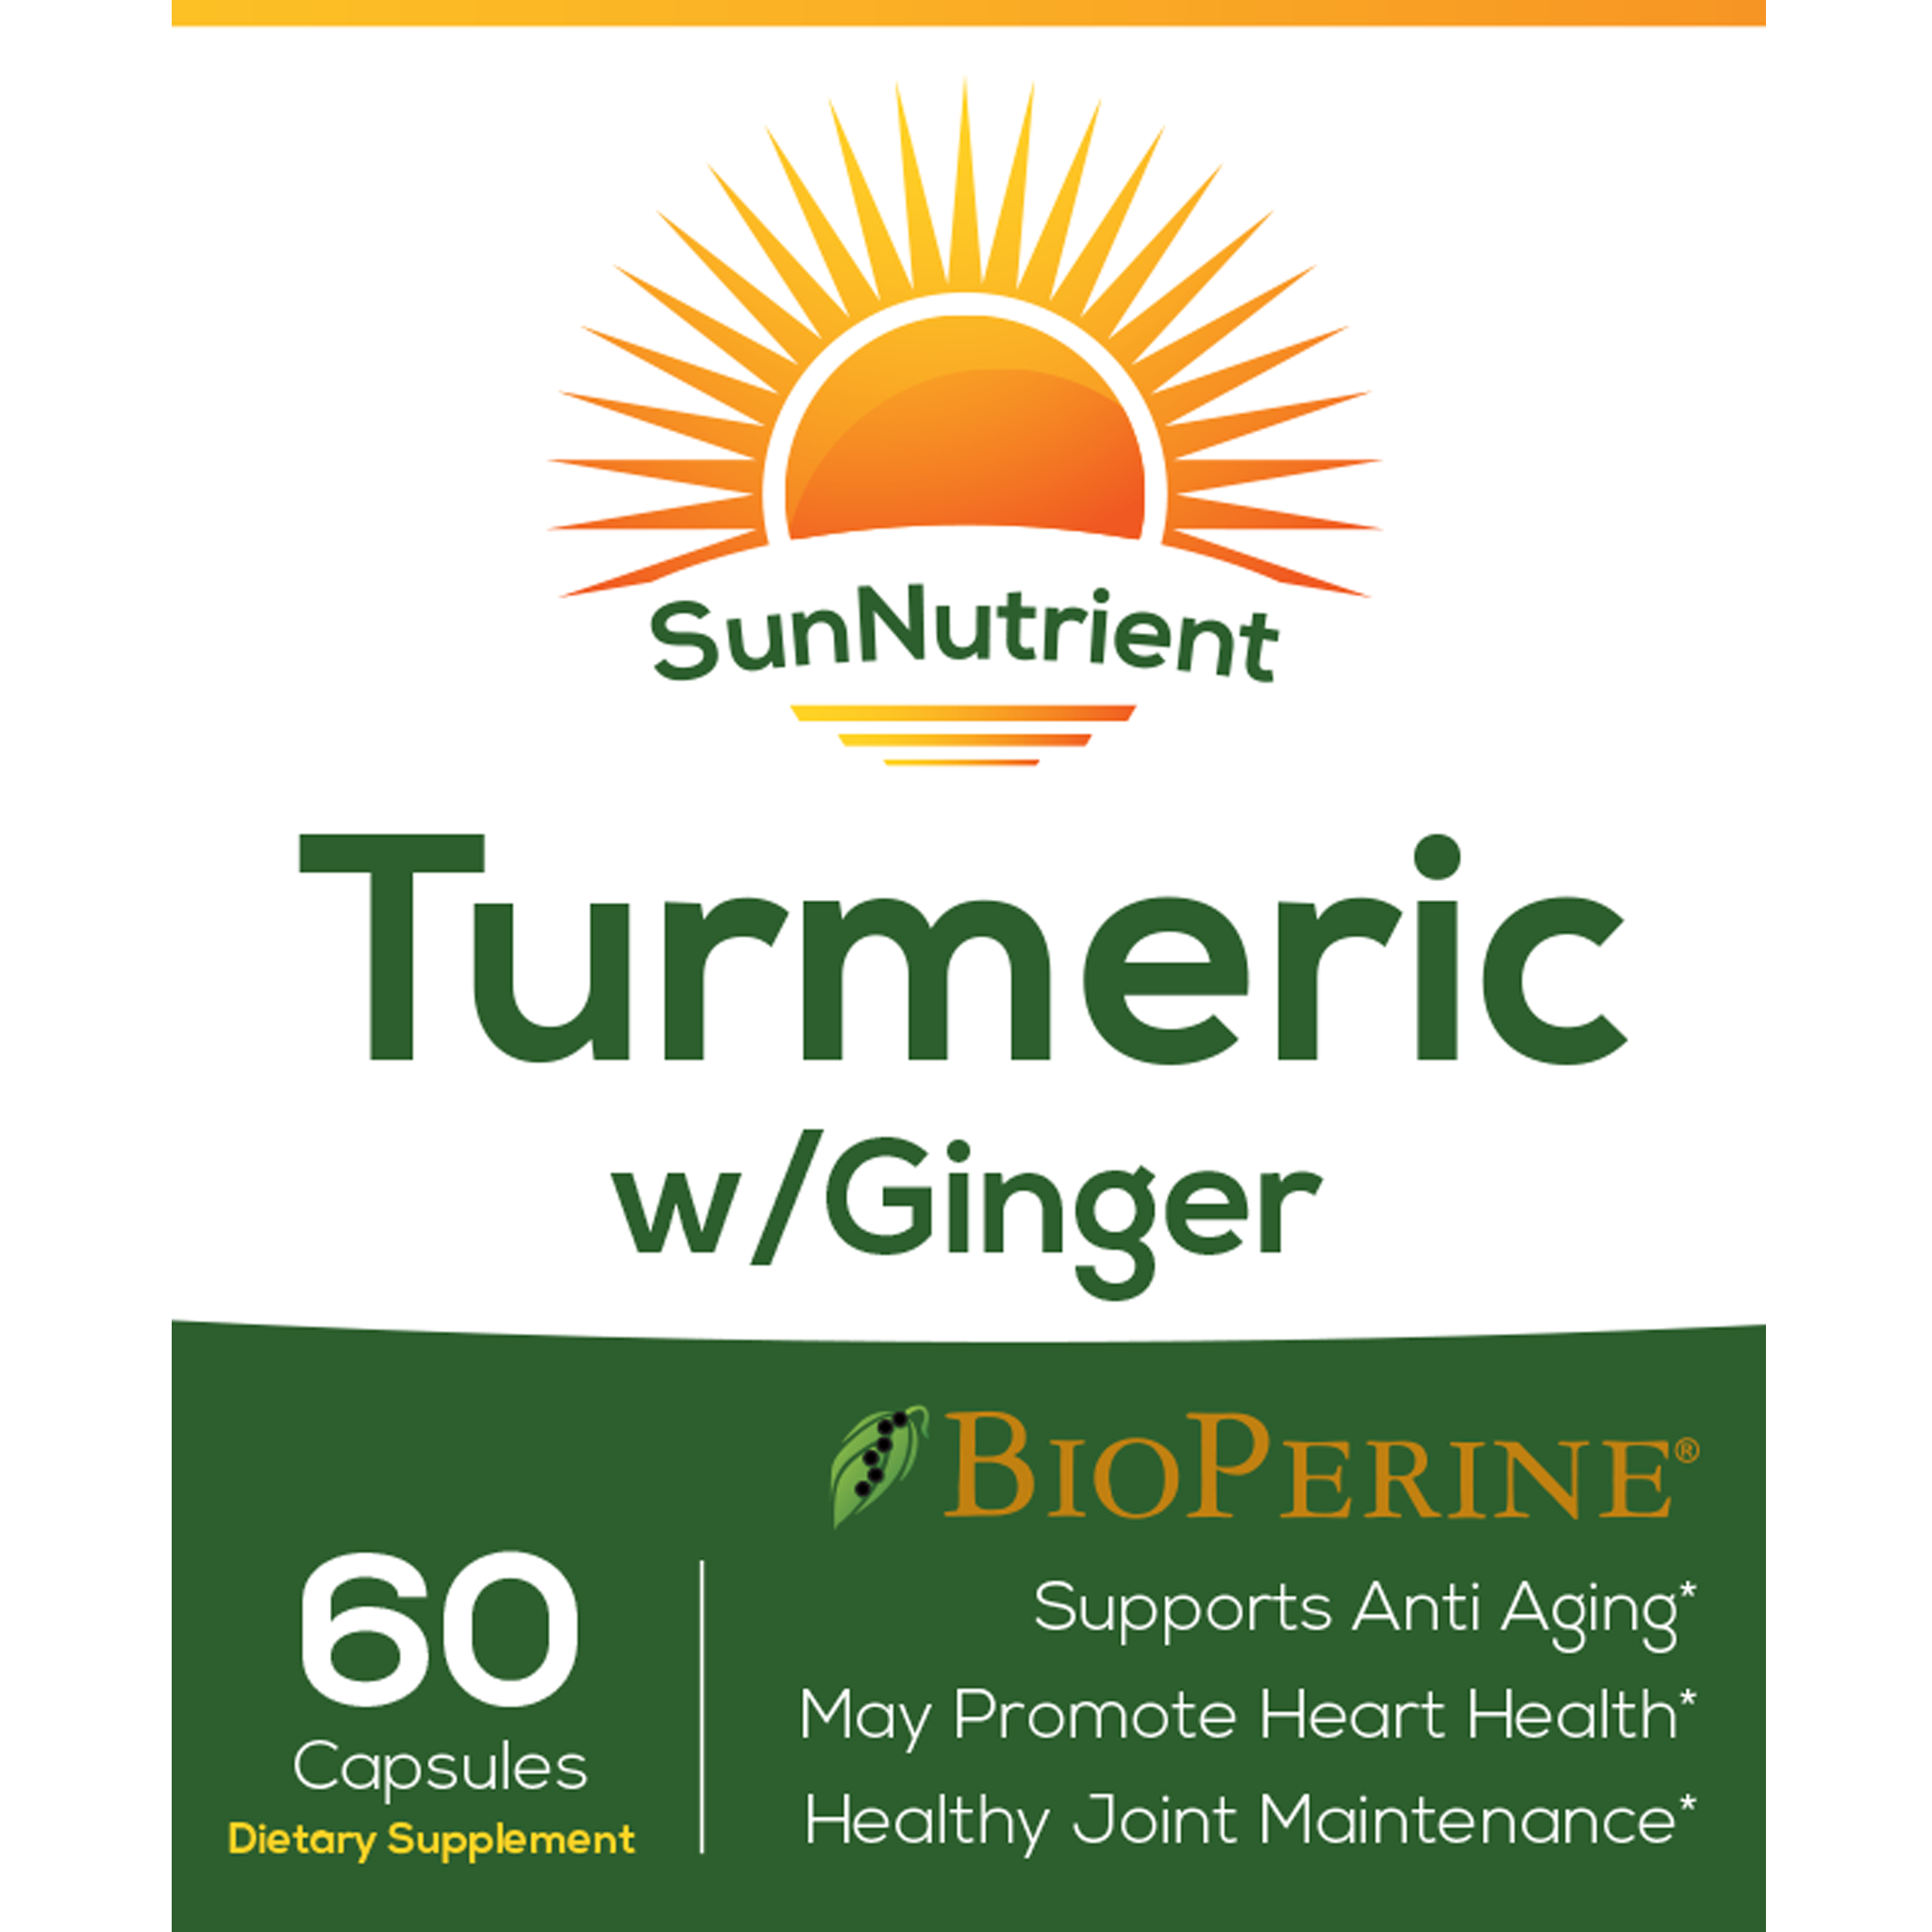 SunNutrient tumeric with ginger supplement Front Label